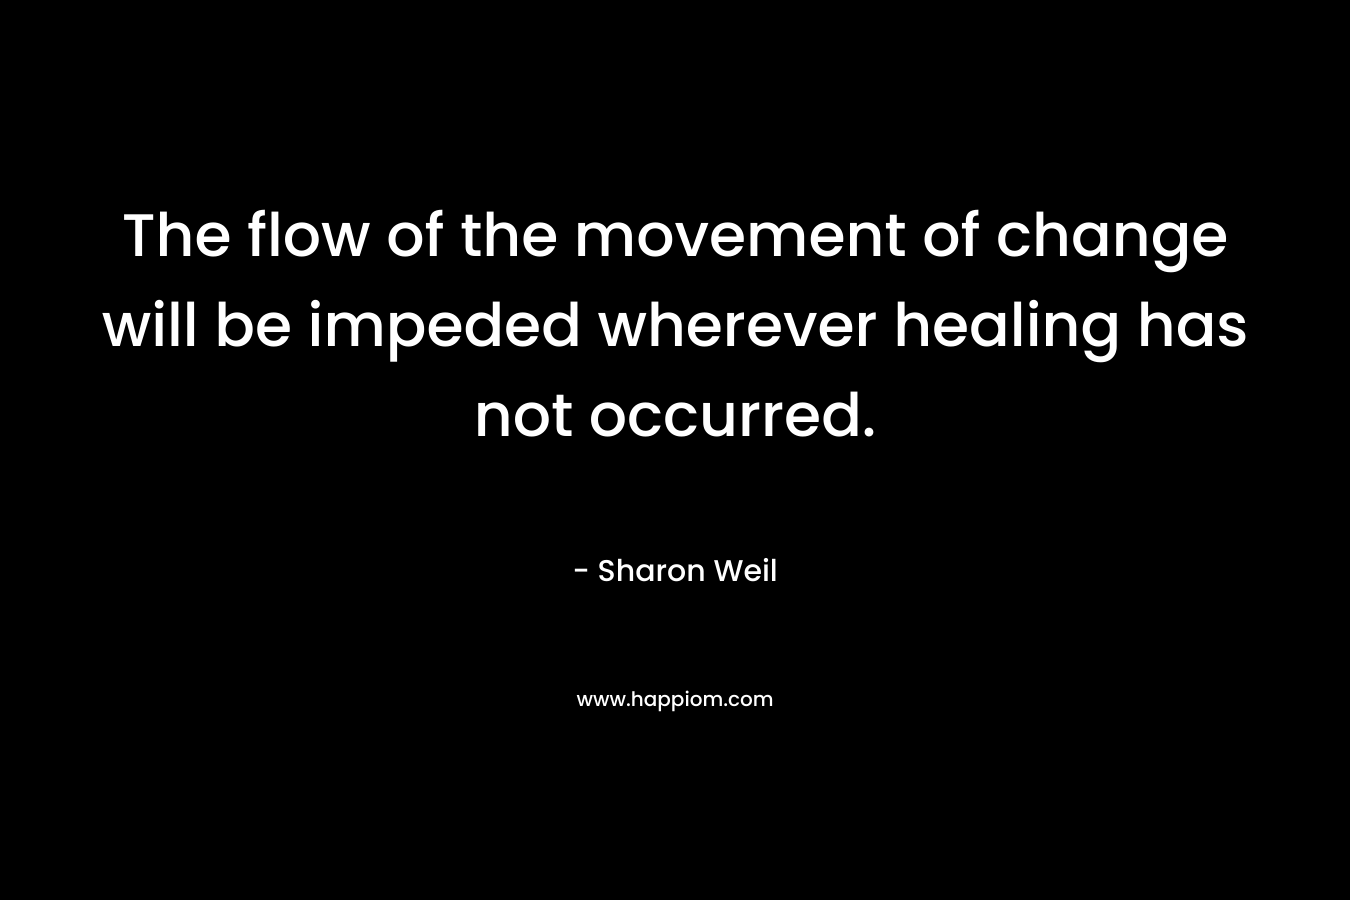 The flow of the movement of change will be impeded wherever healing has not occurred.